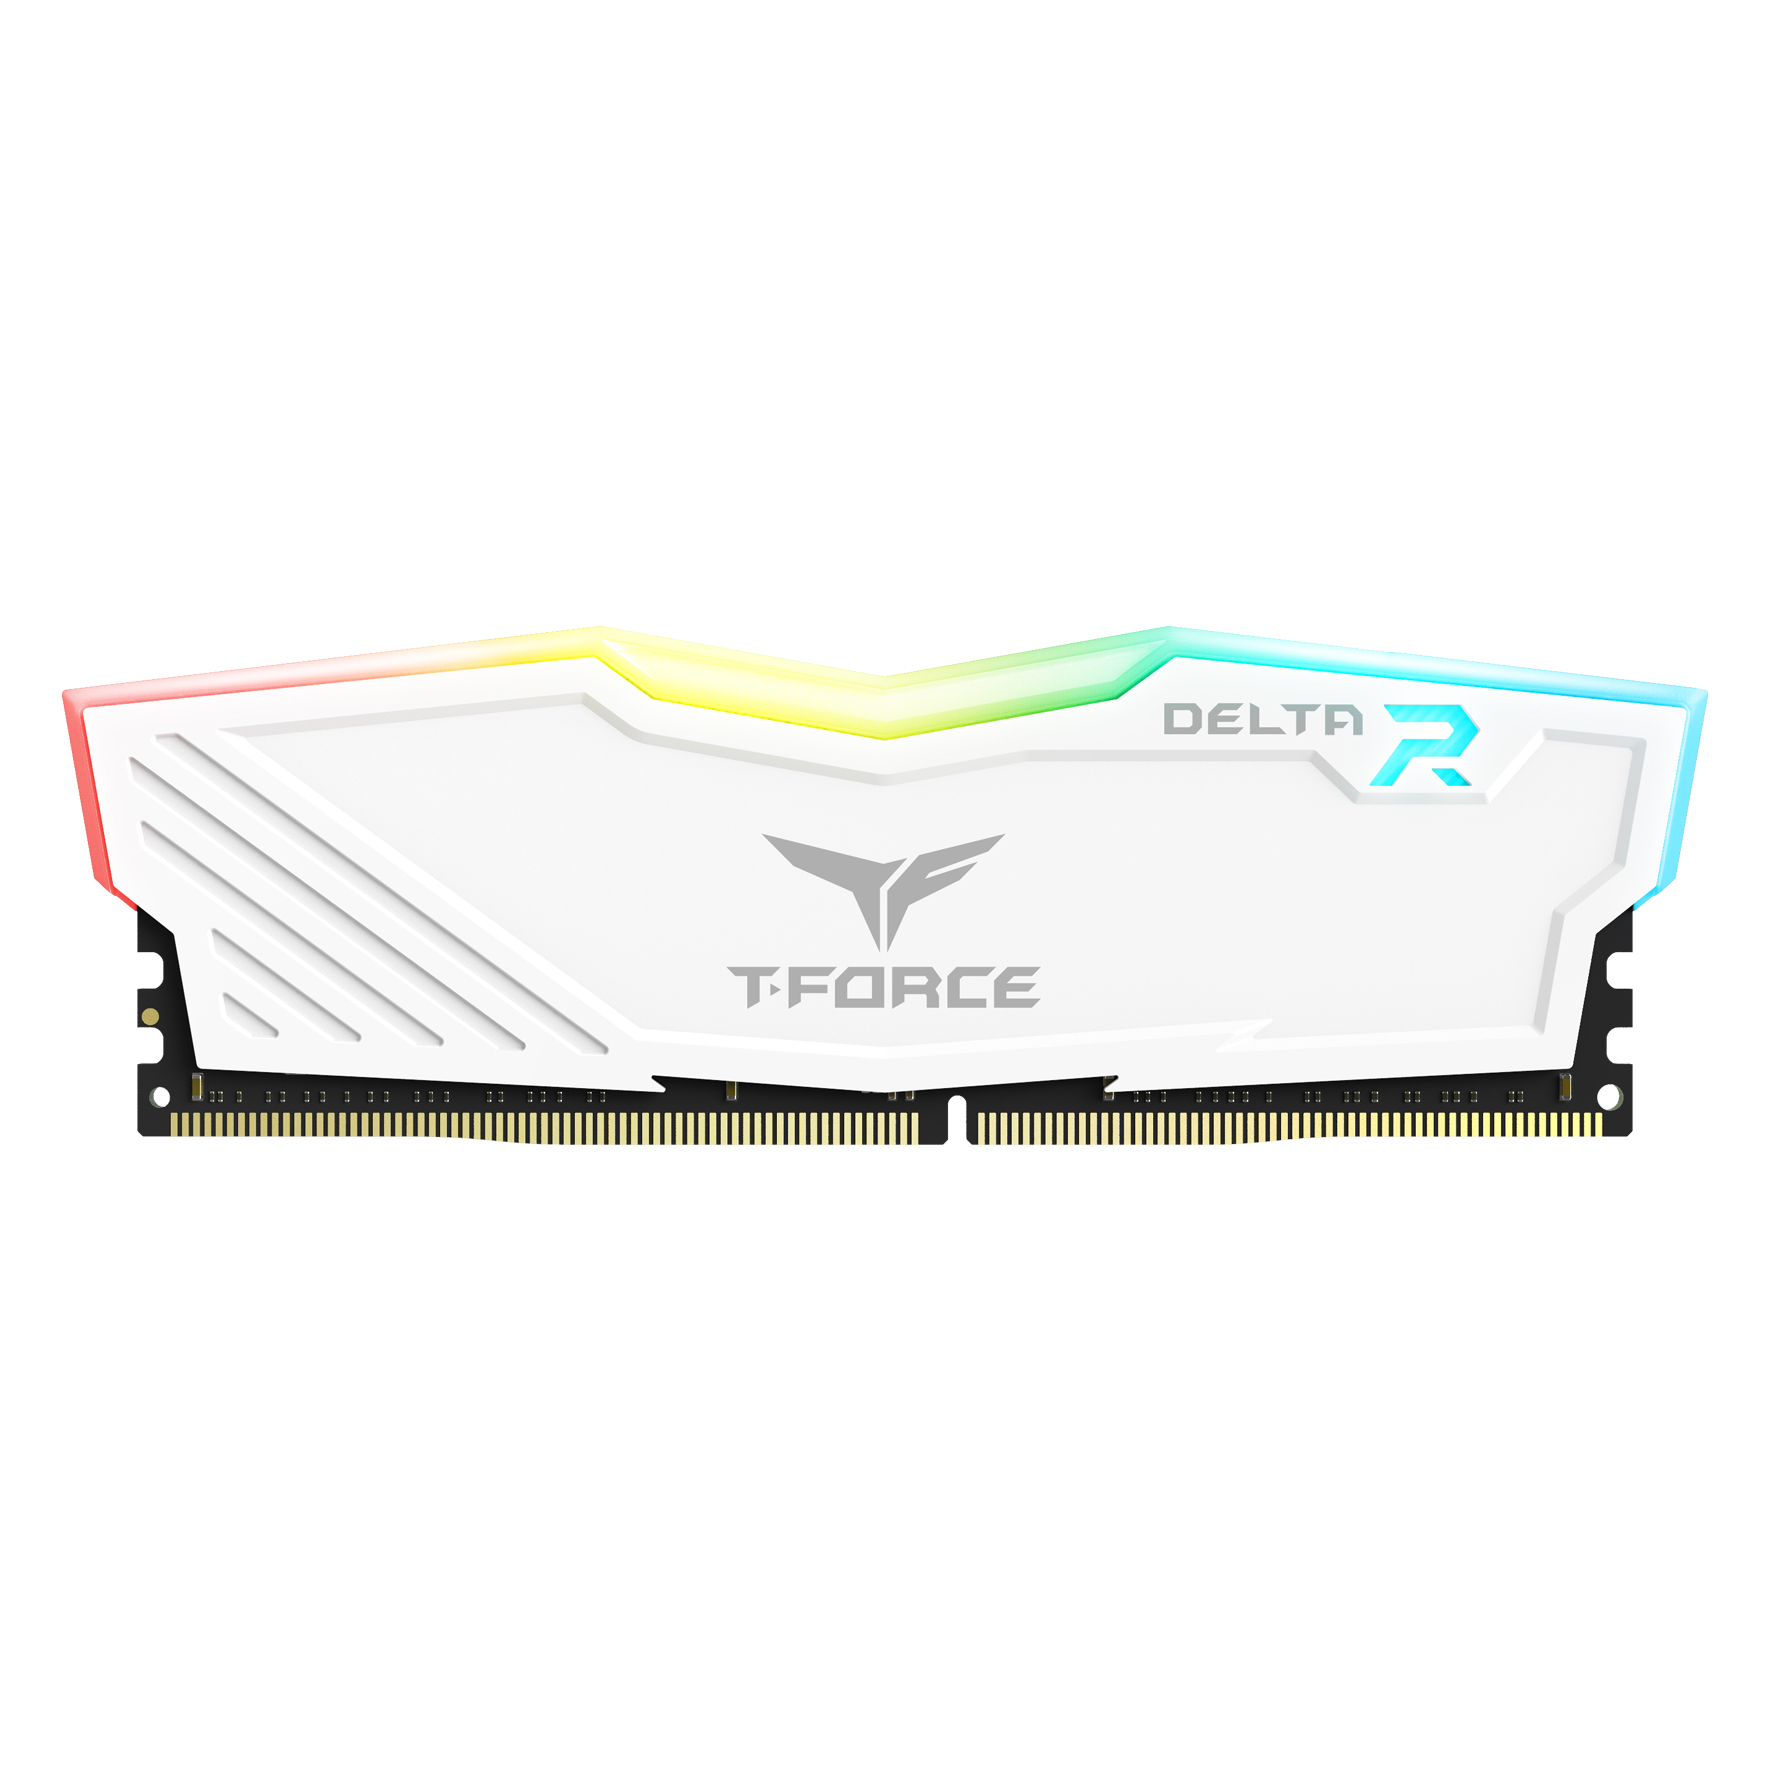 DELTA RGB DDR4 Memory Moudle